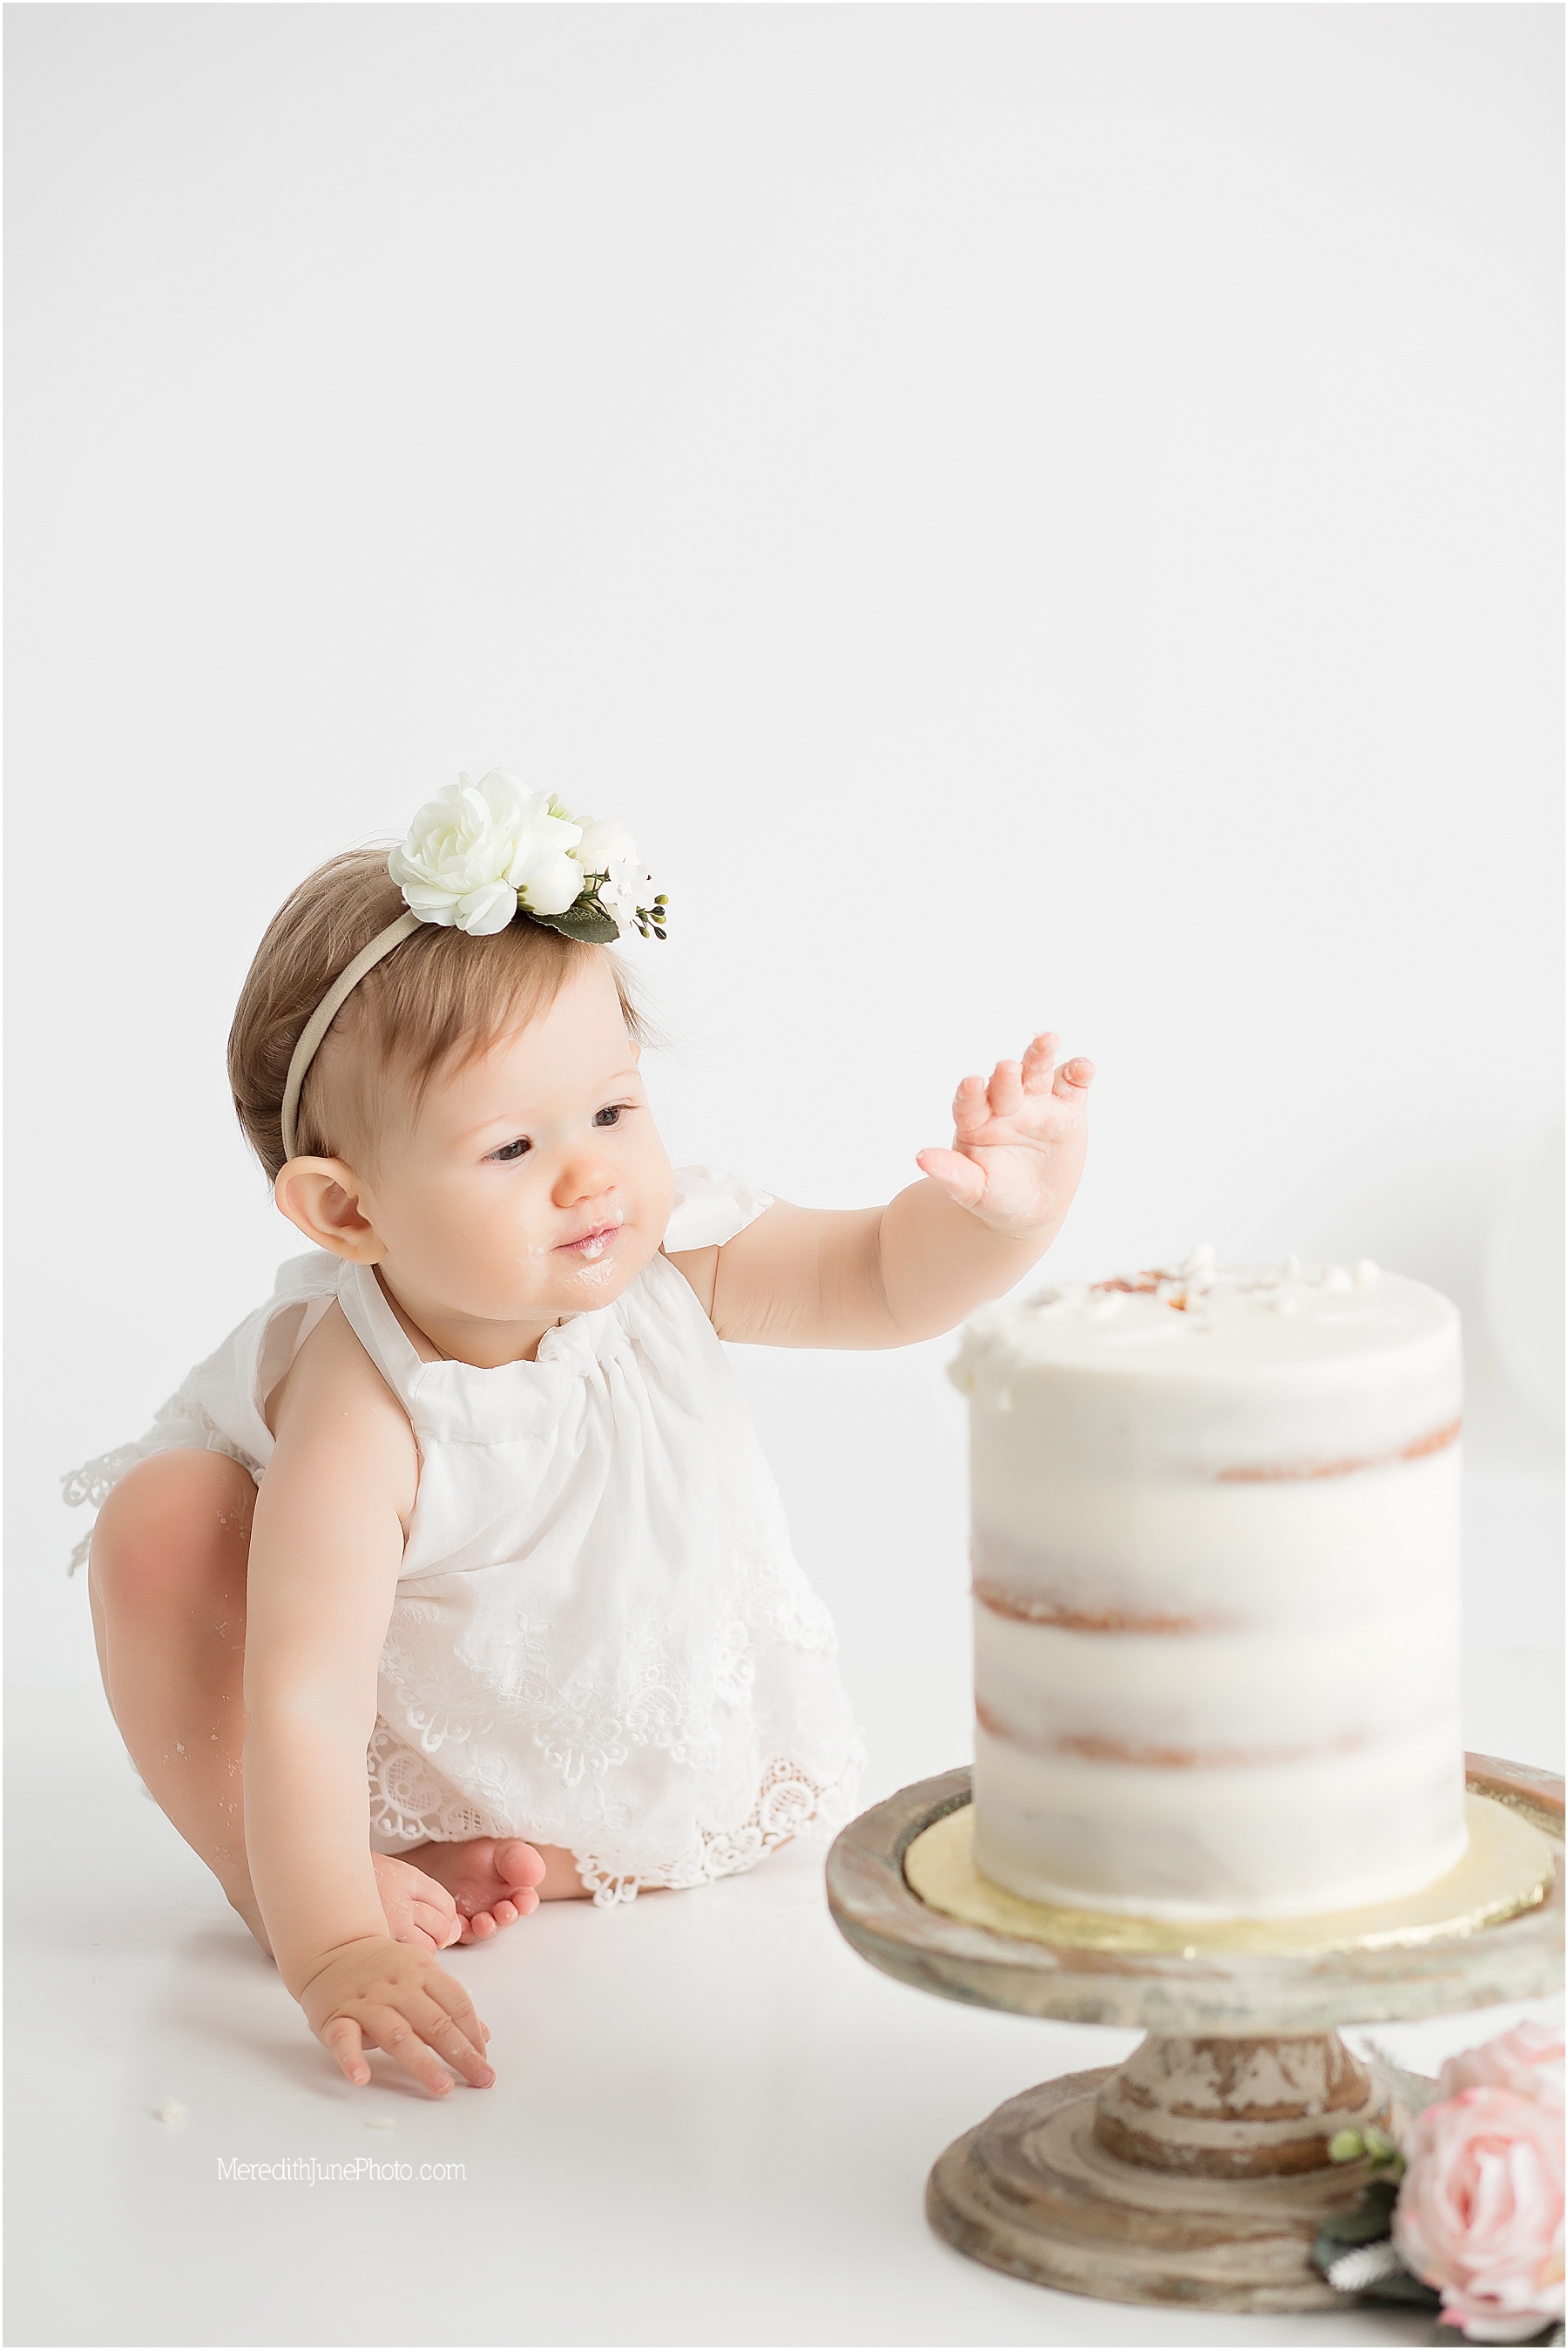 Raleigh's one year session at Meredith June Photography